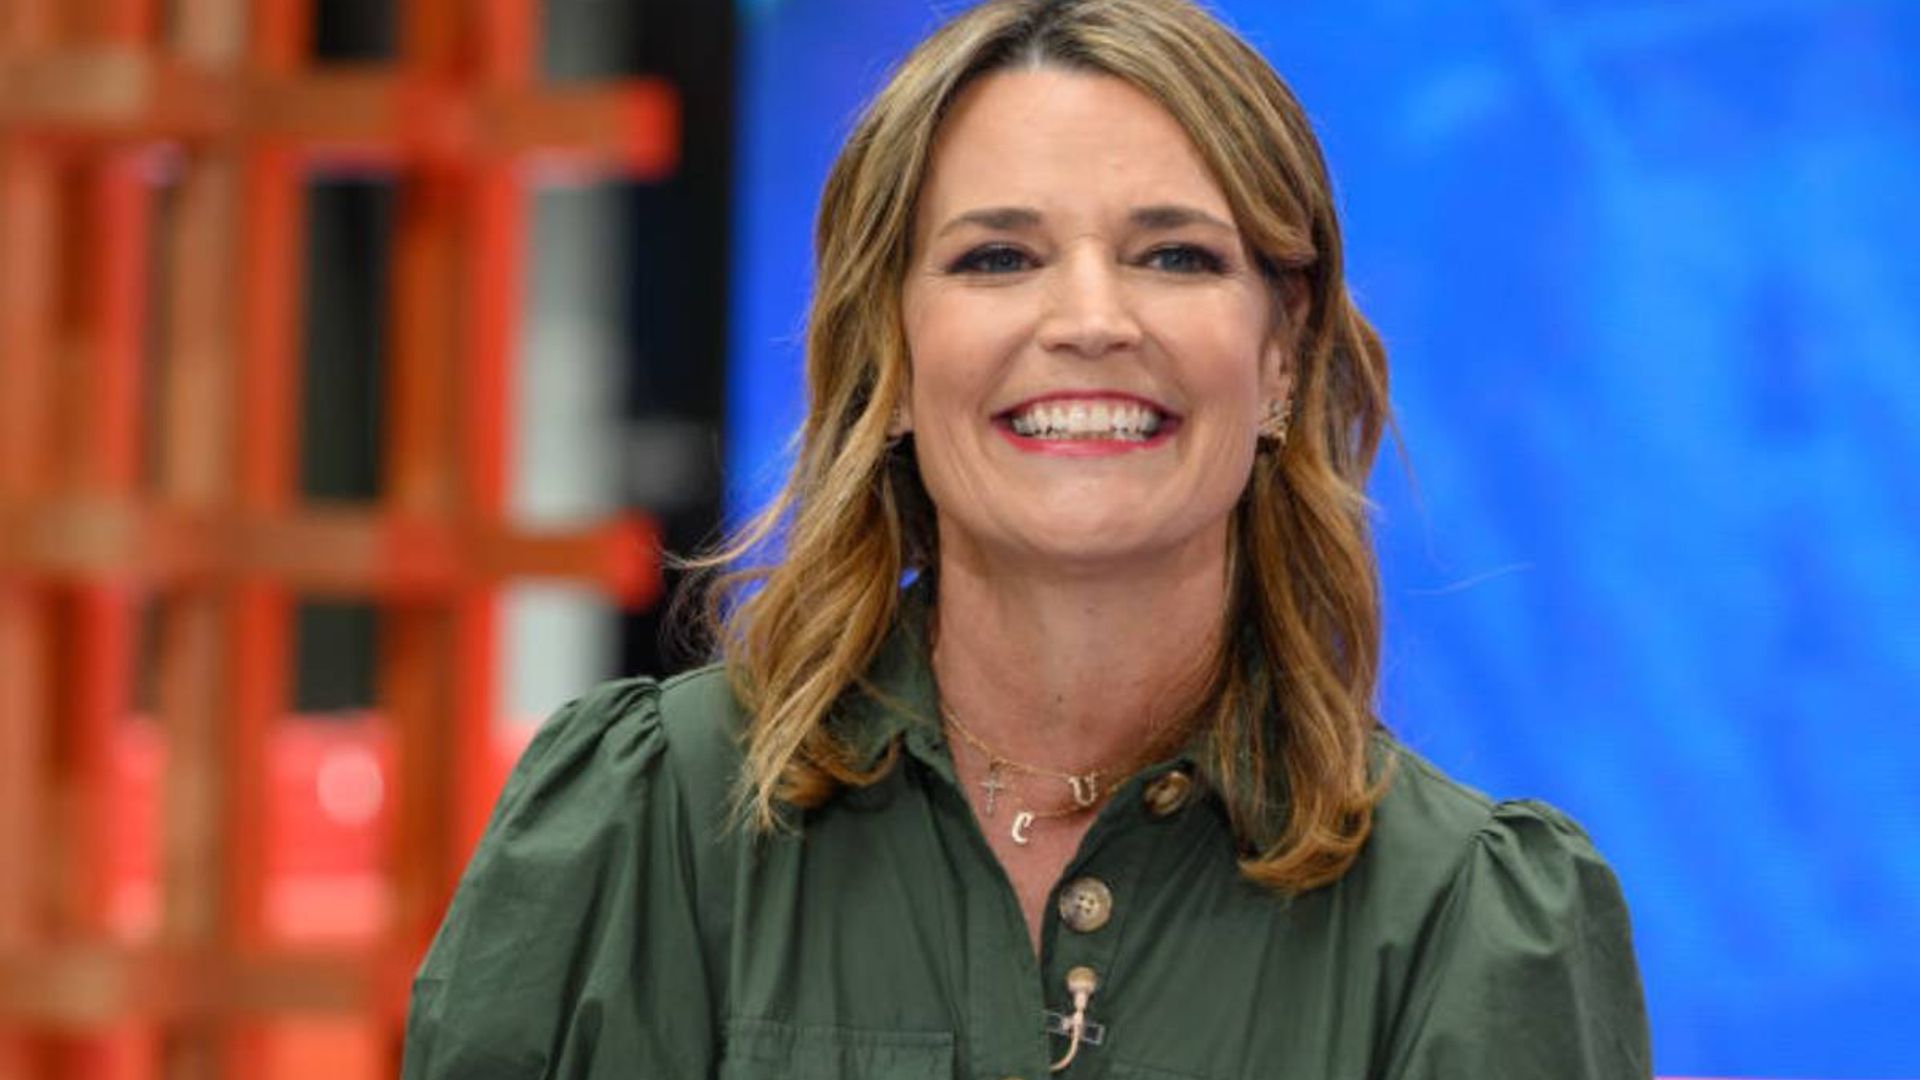 Today's Savannah Guthrie's epic high school yearbook photo is too good